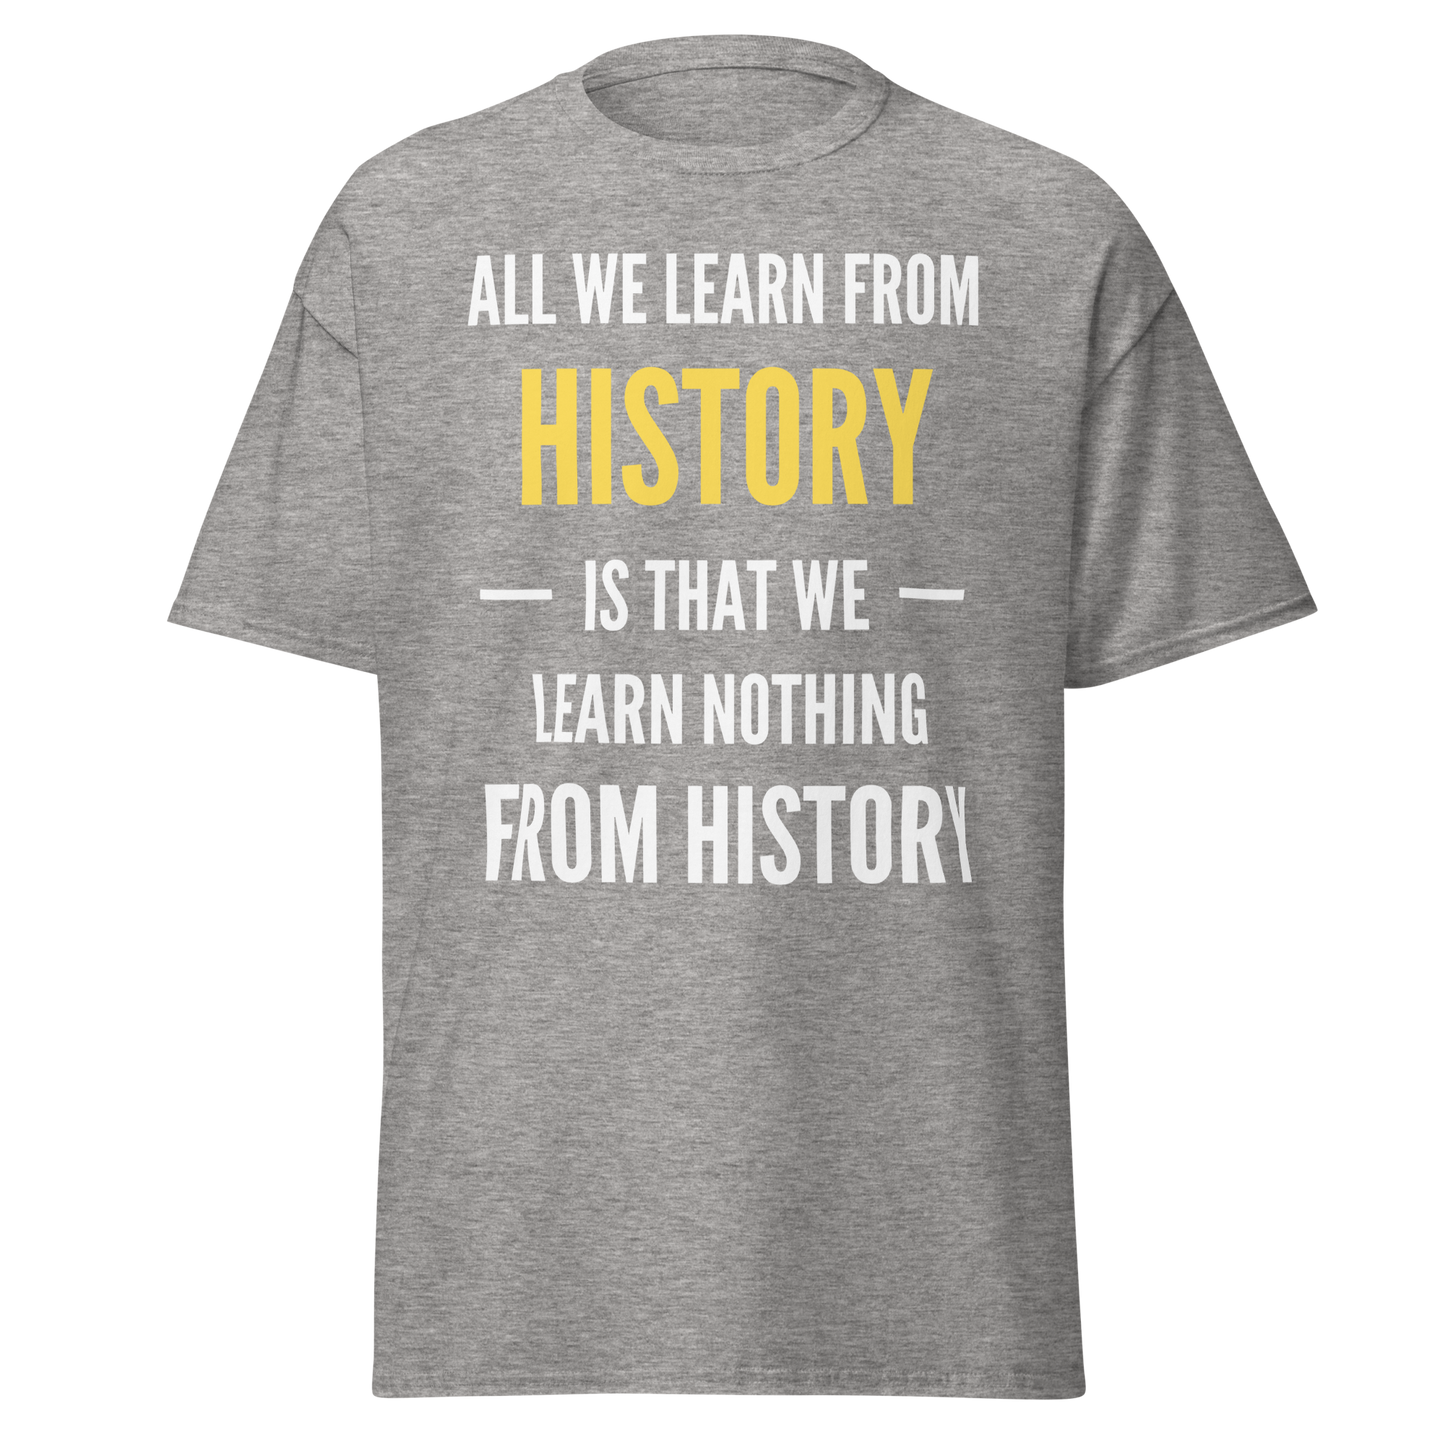 We Learn Nothing From History (t-shirt)